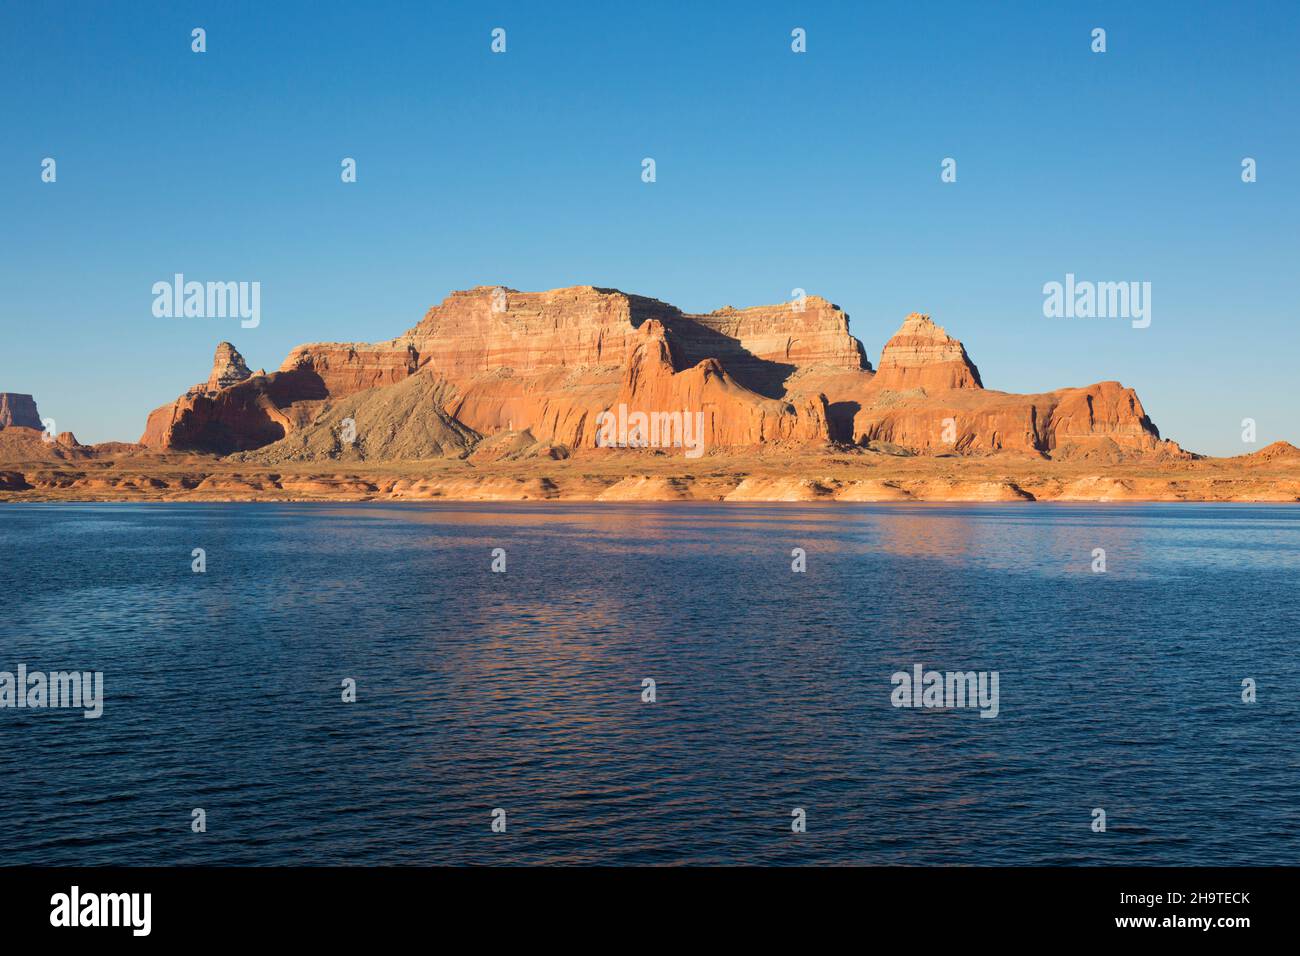 Glen Canyon National Recreation Area, Utah, USA. View across the tranquil waters of Lake Powell to high sandstone mesa, early morning. Stock Photo